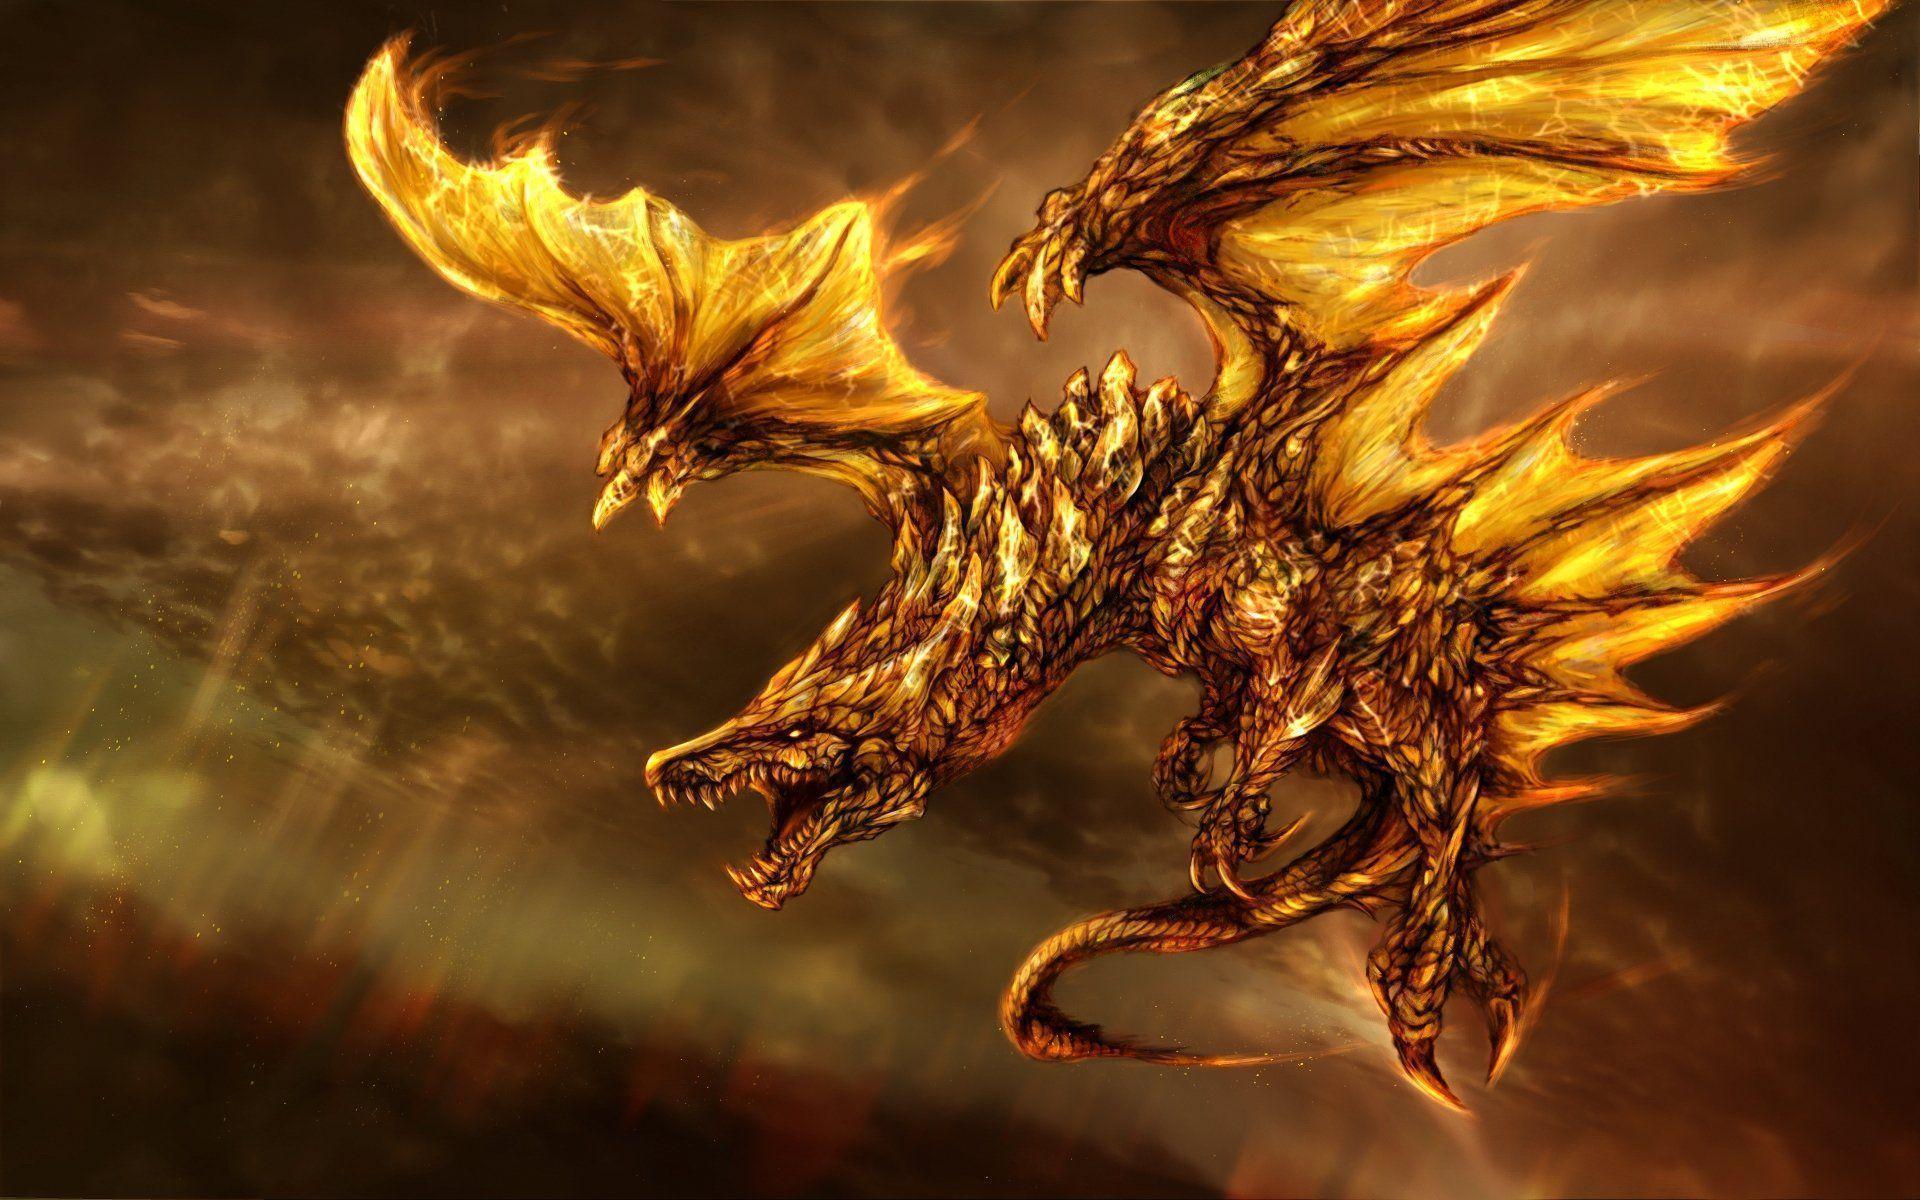 Wallpaper For > Cool Dragon Background For Computers That Move